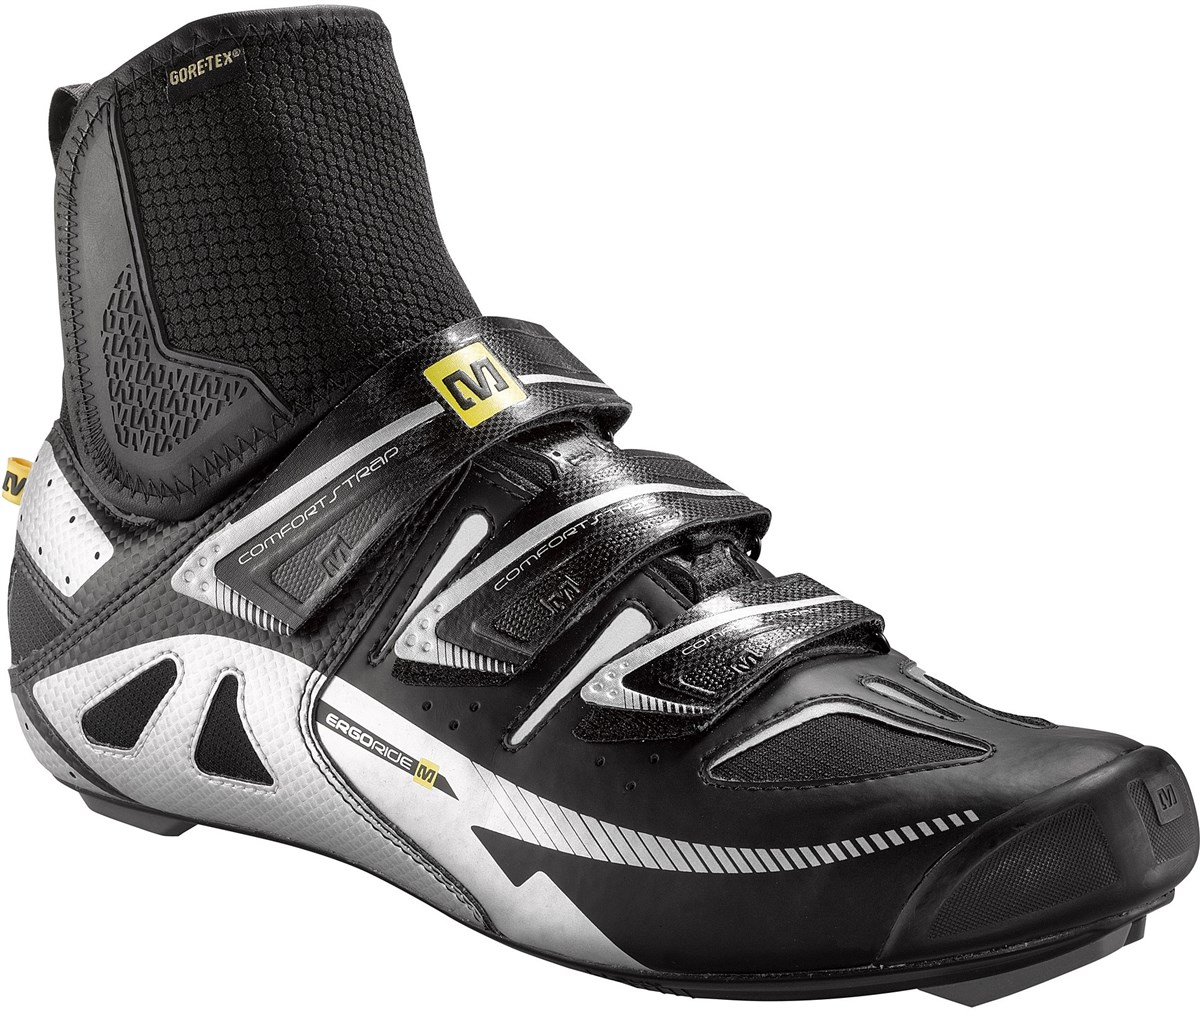 Mavic Frost Winter Road Cycling Shoes product image